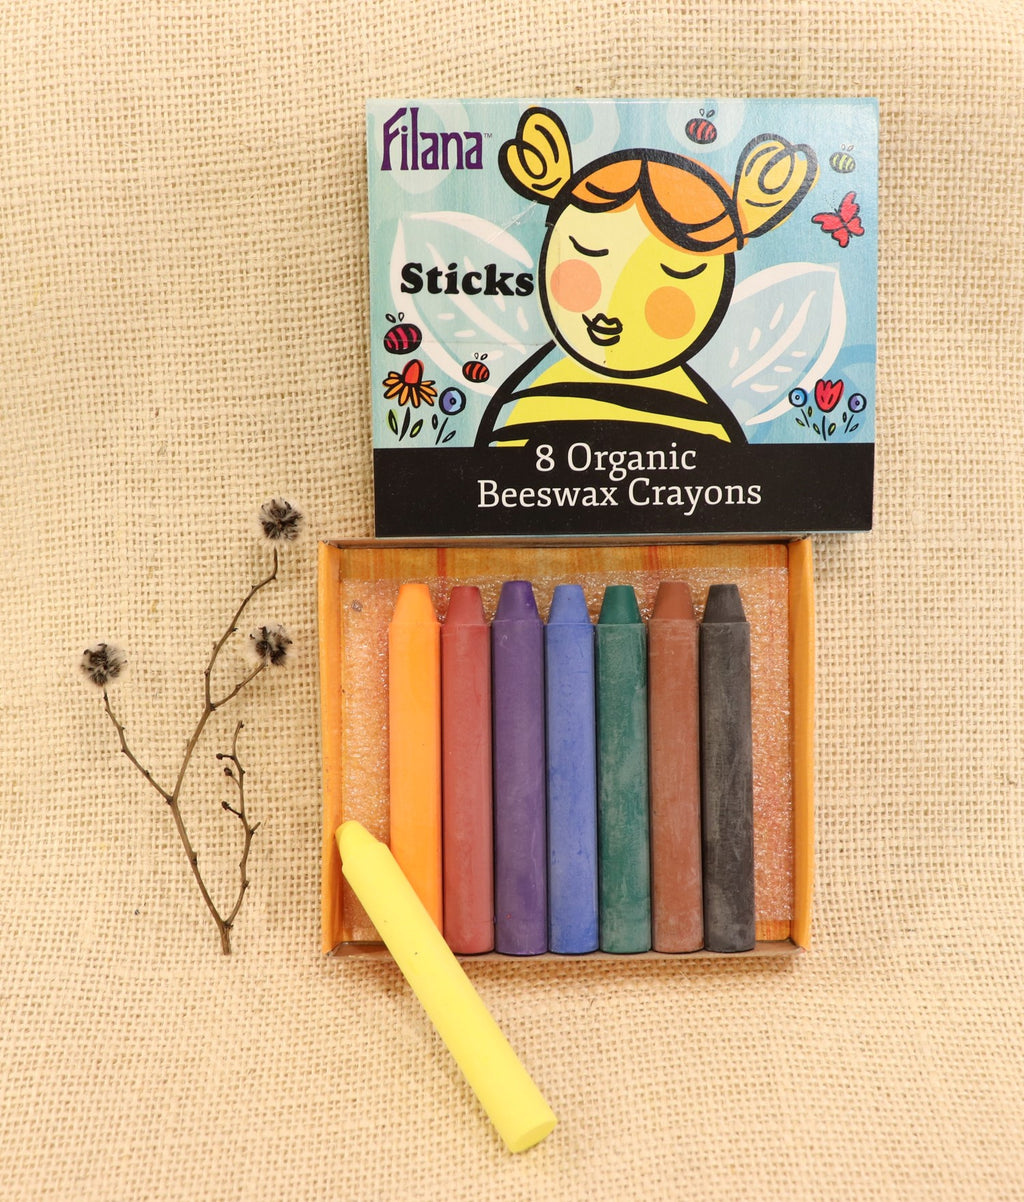 Filana Beeswax Crayons | 8 Sticks with Black and Brown | Children of the Wild